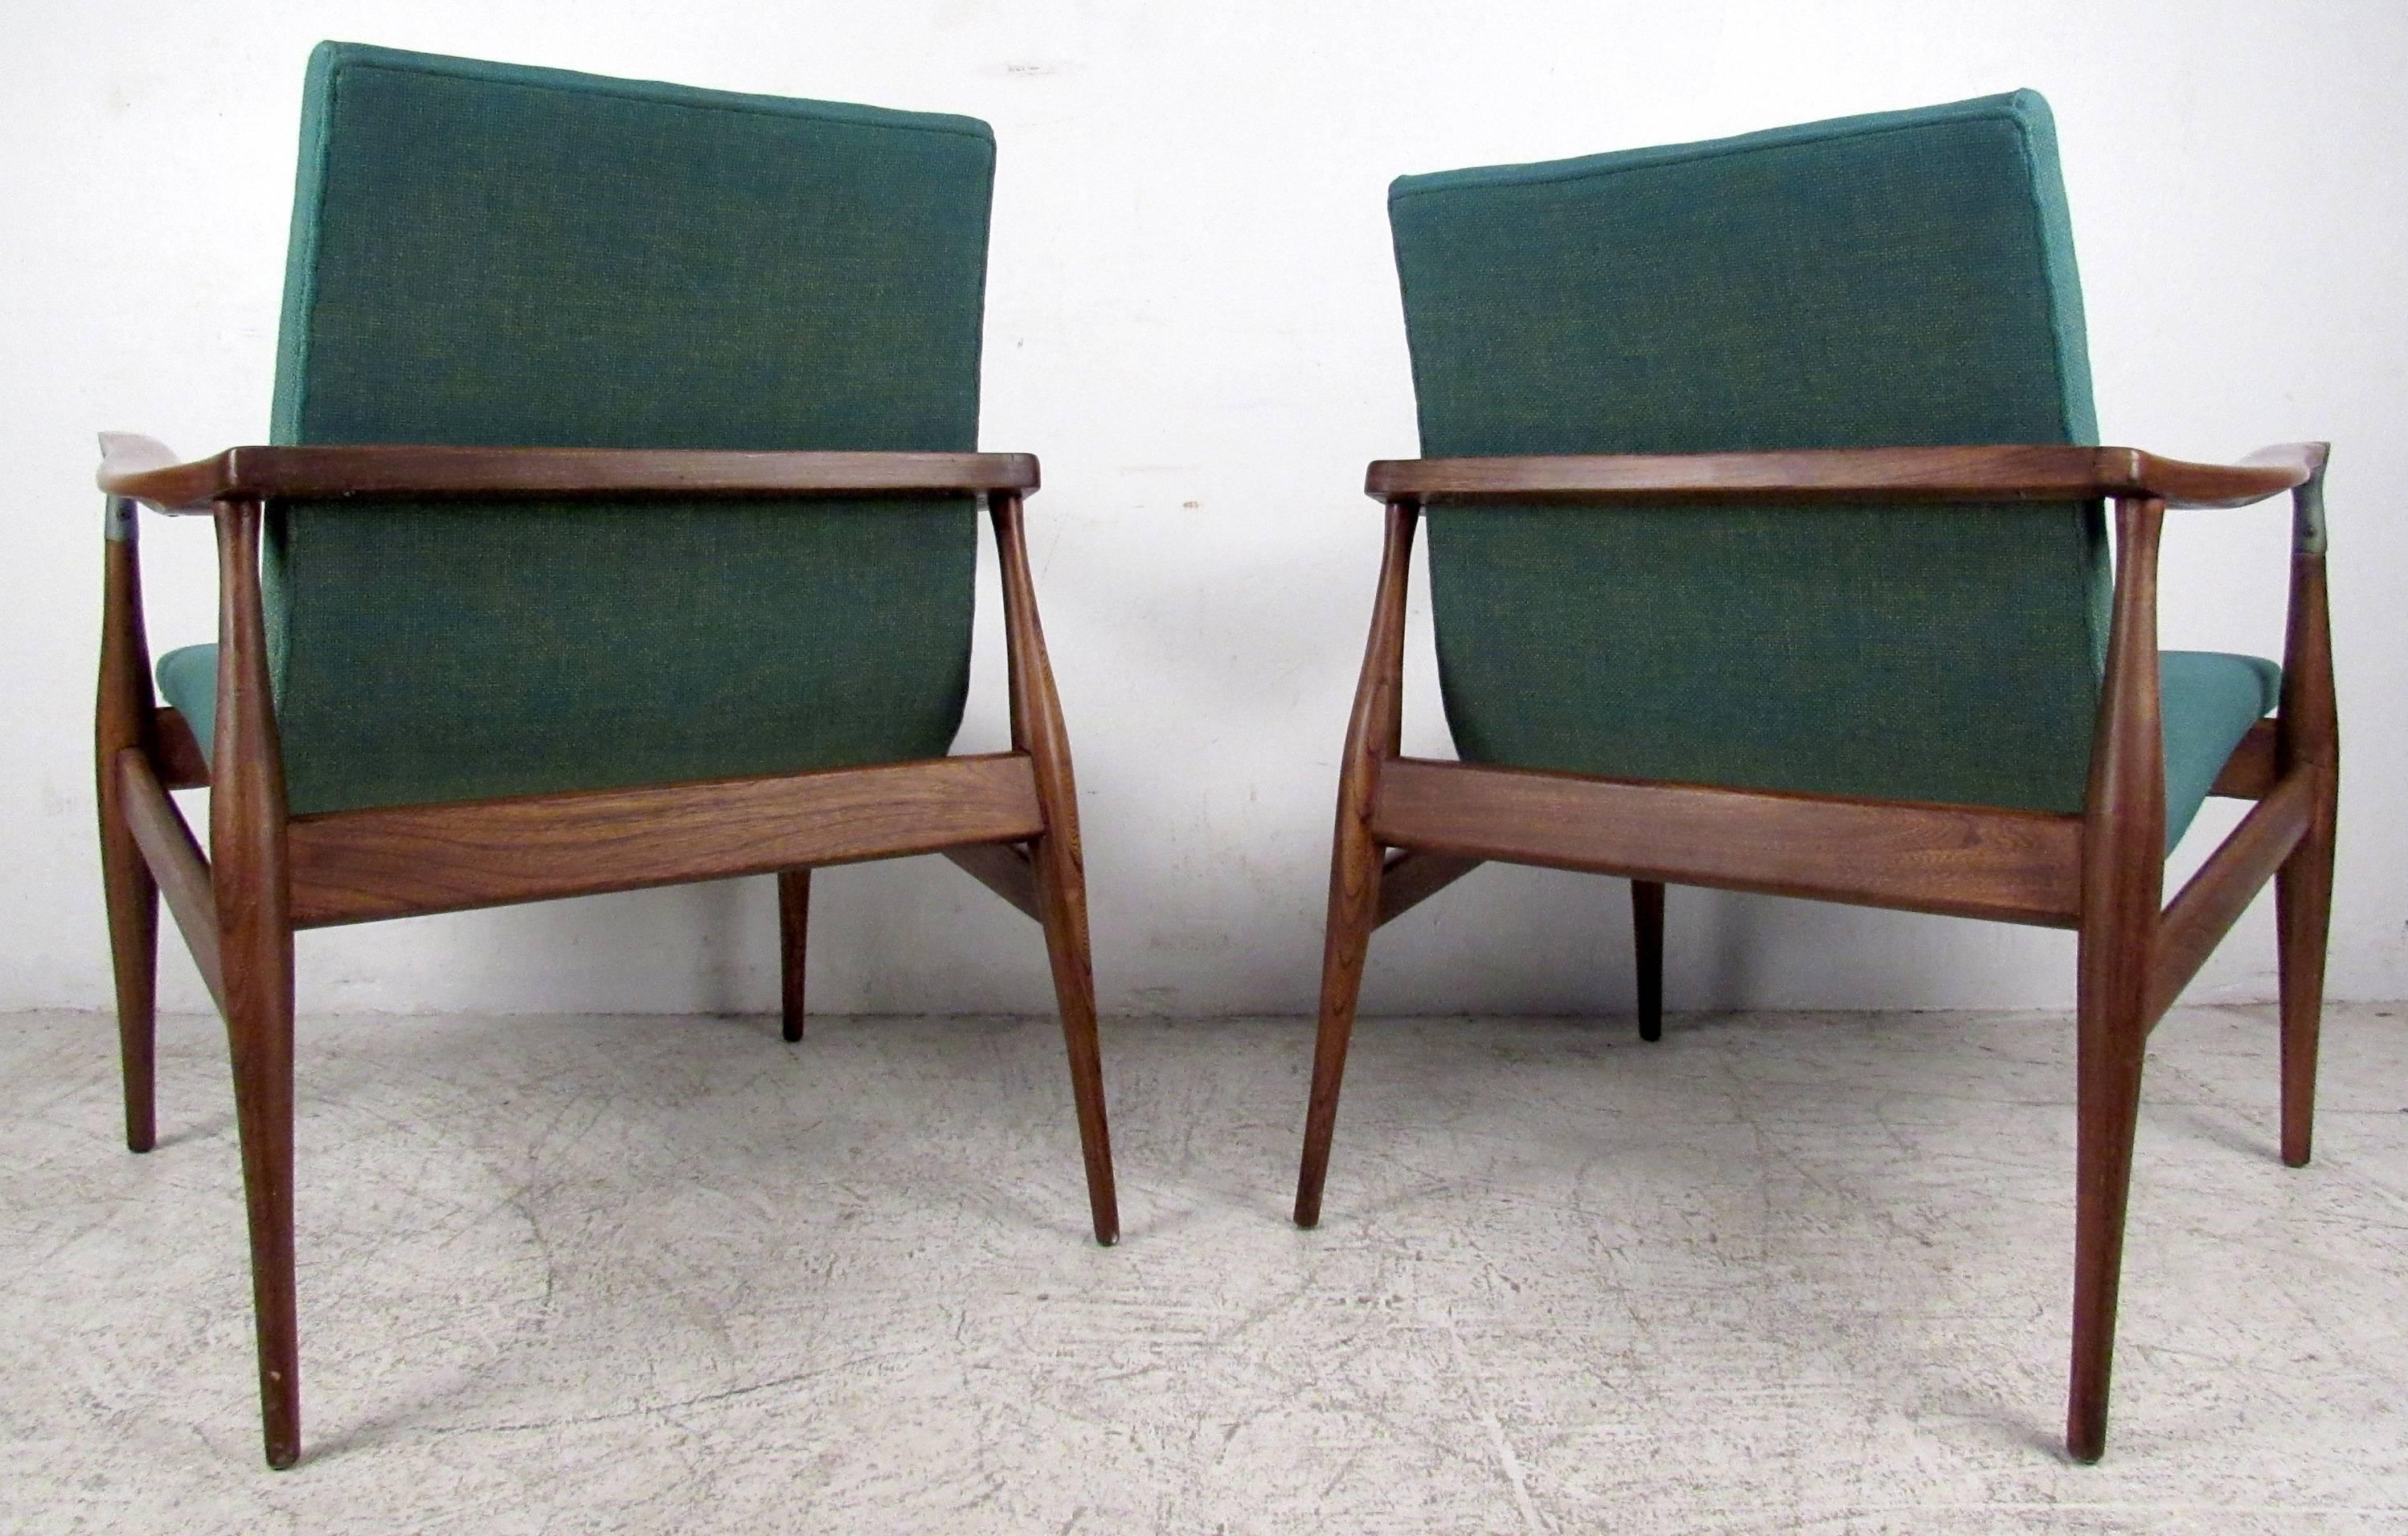 Upholstery Stunning Sculpted Arm Chairs, Mid-Century Modern